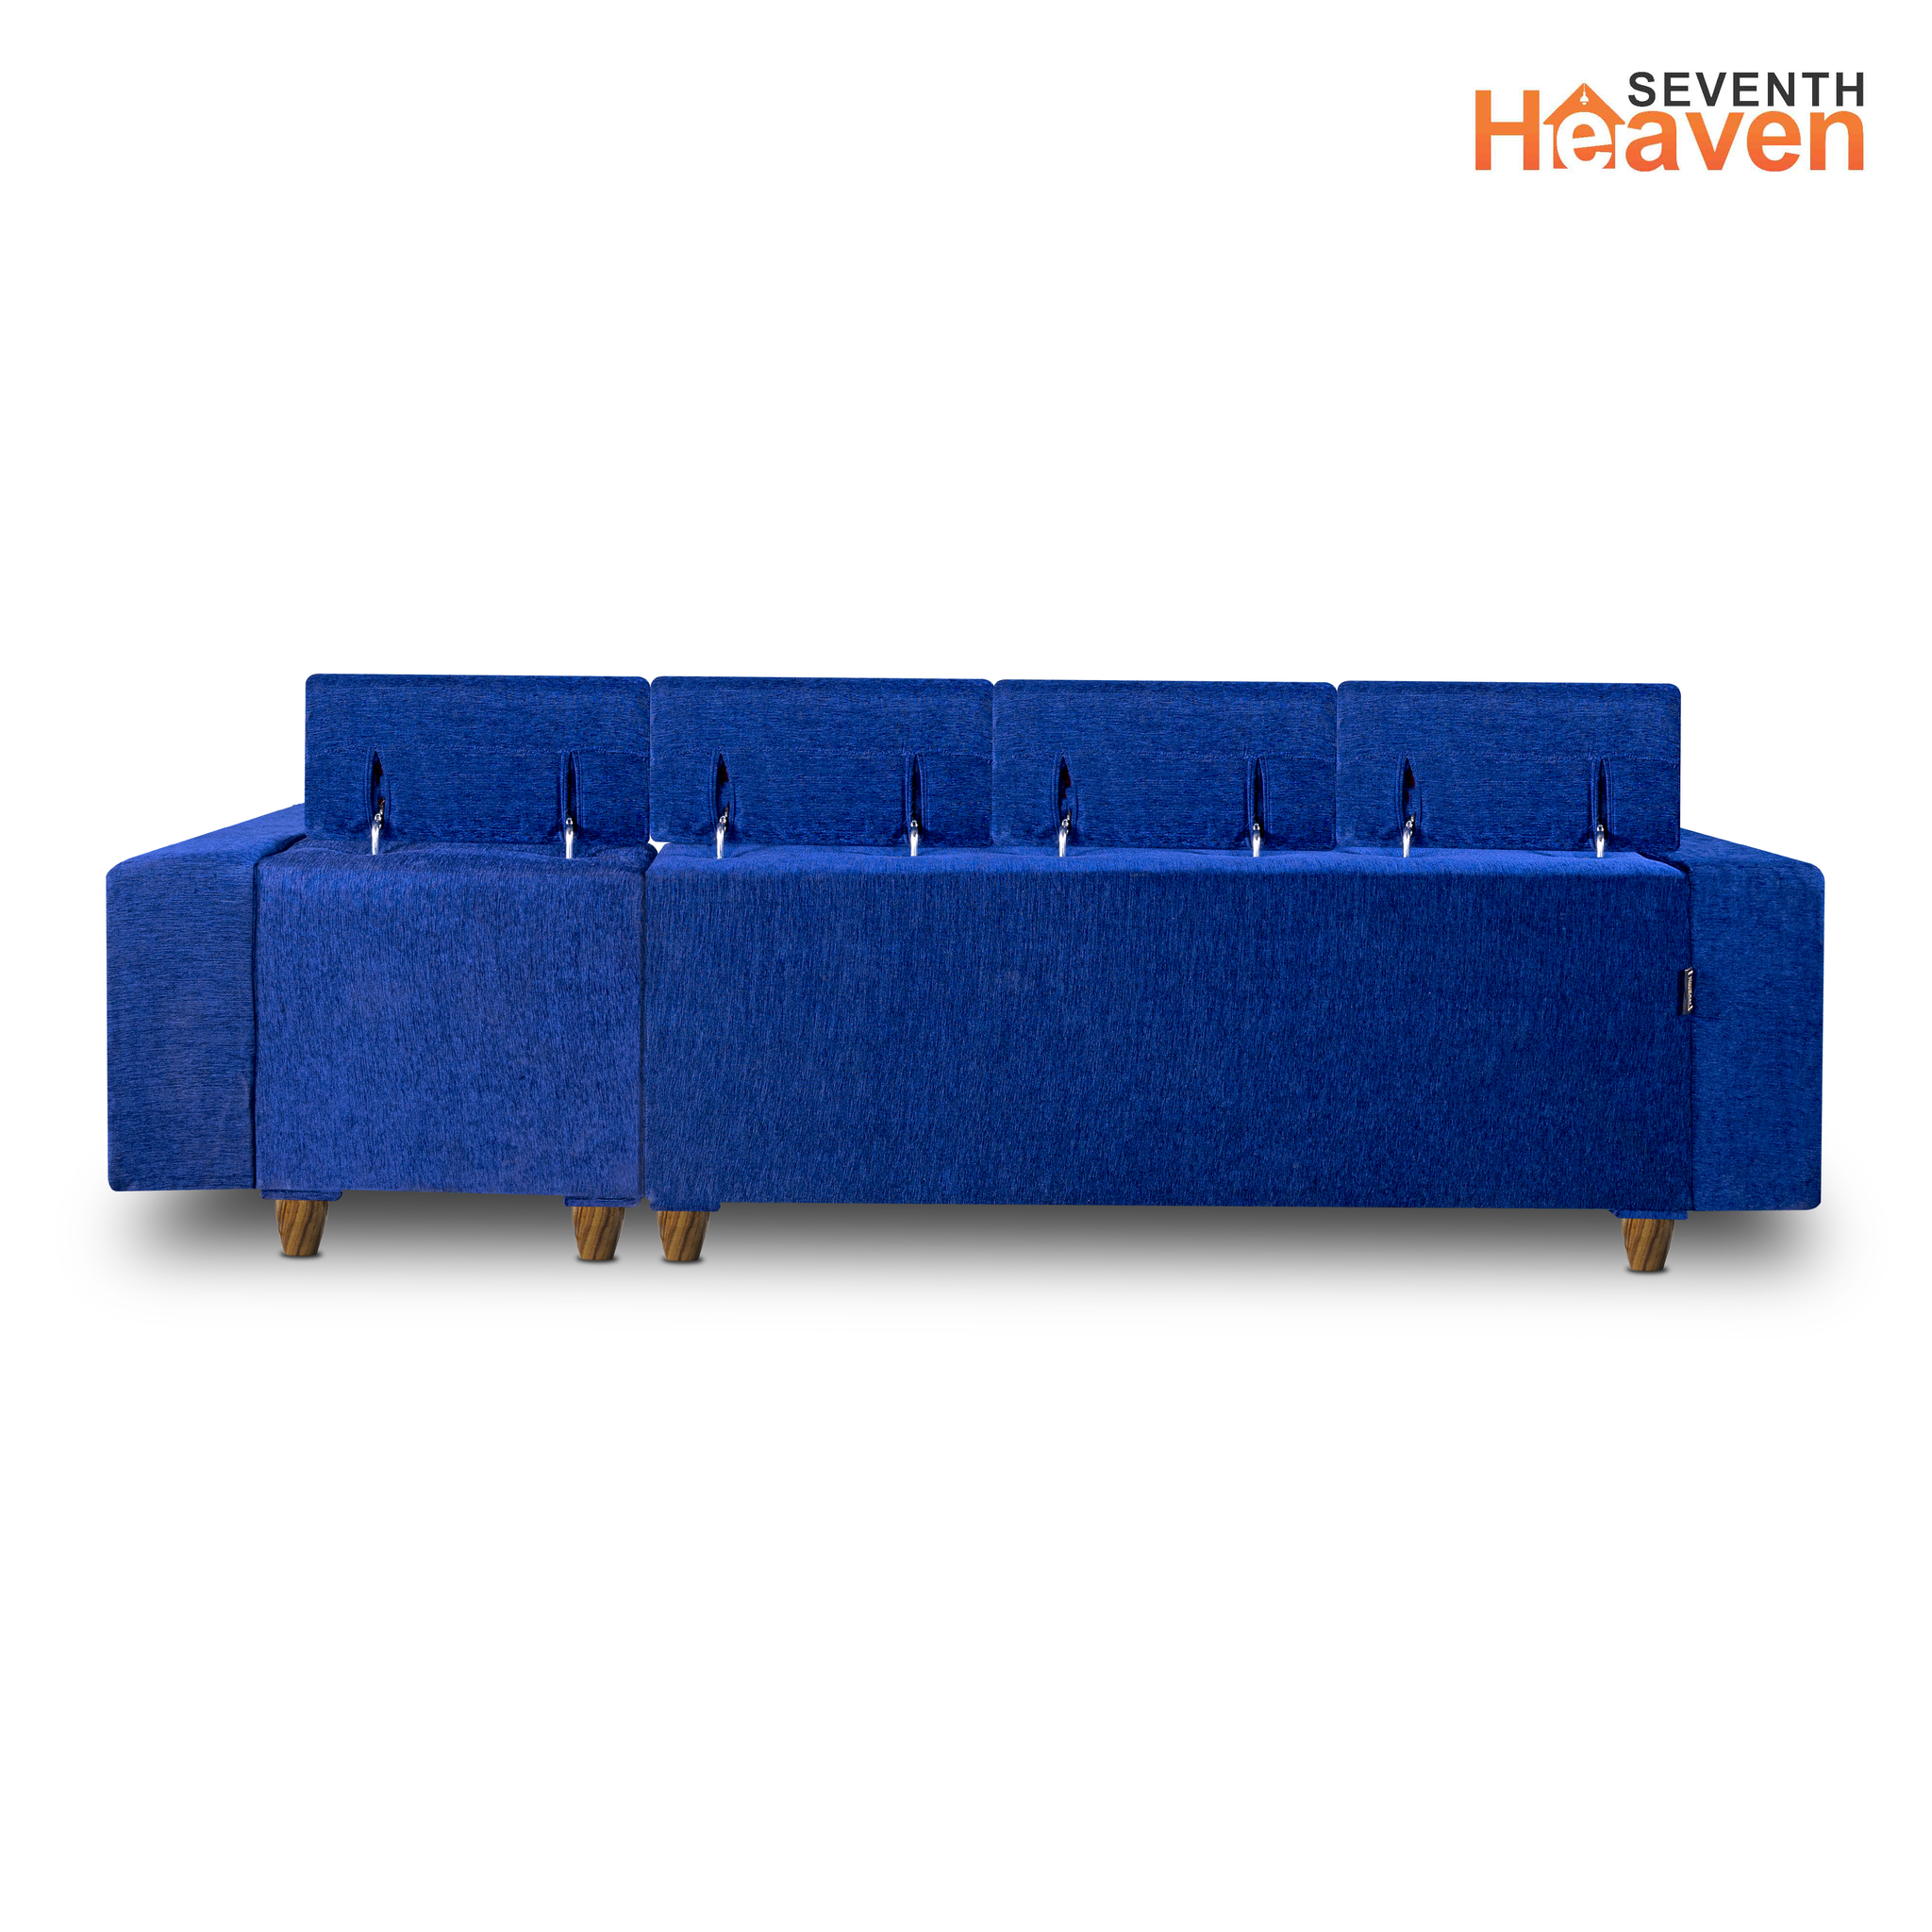 Berlin 6 Seater Sofa, Extra Spacious, Chenille Molfino Fabric with 3 Years Warranty( Finish Color - Blue, Style - Right Corner Sofa)